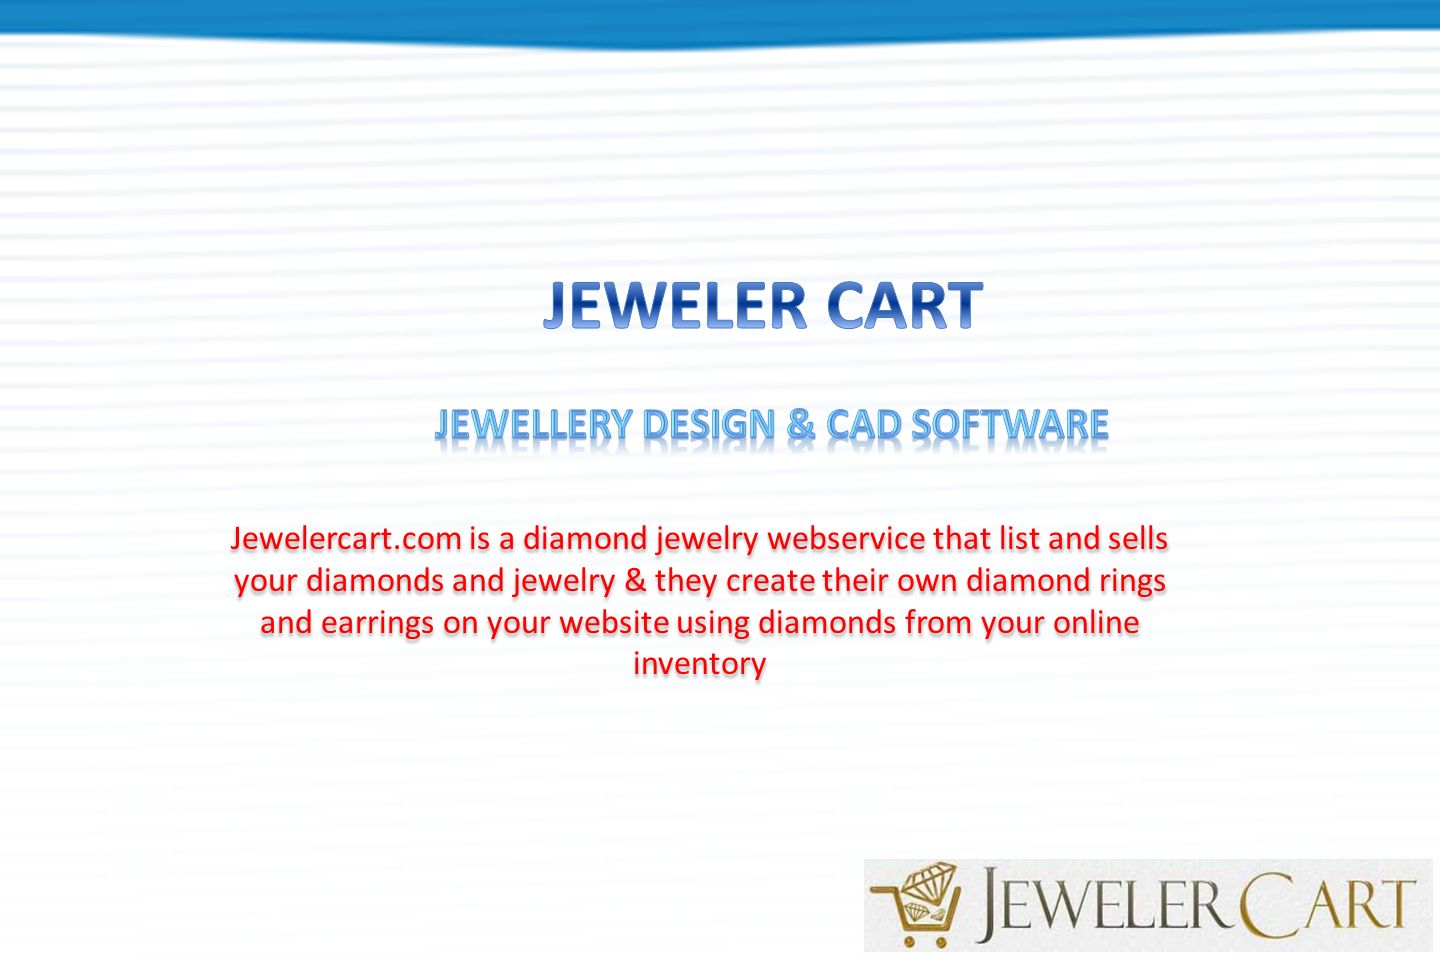 Jewelercart.com is a diamond jewelry webservice that list and sells your diamonds and jewelry & they create their own diamond rings and earrings on your website using diamonds from your online inventory